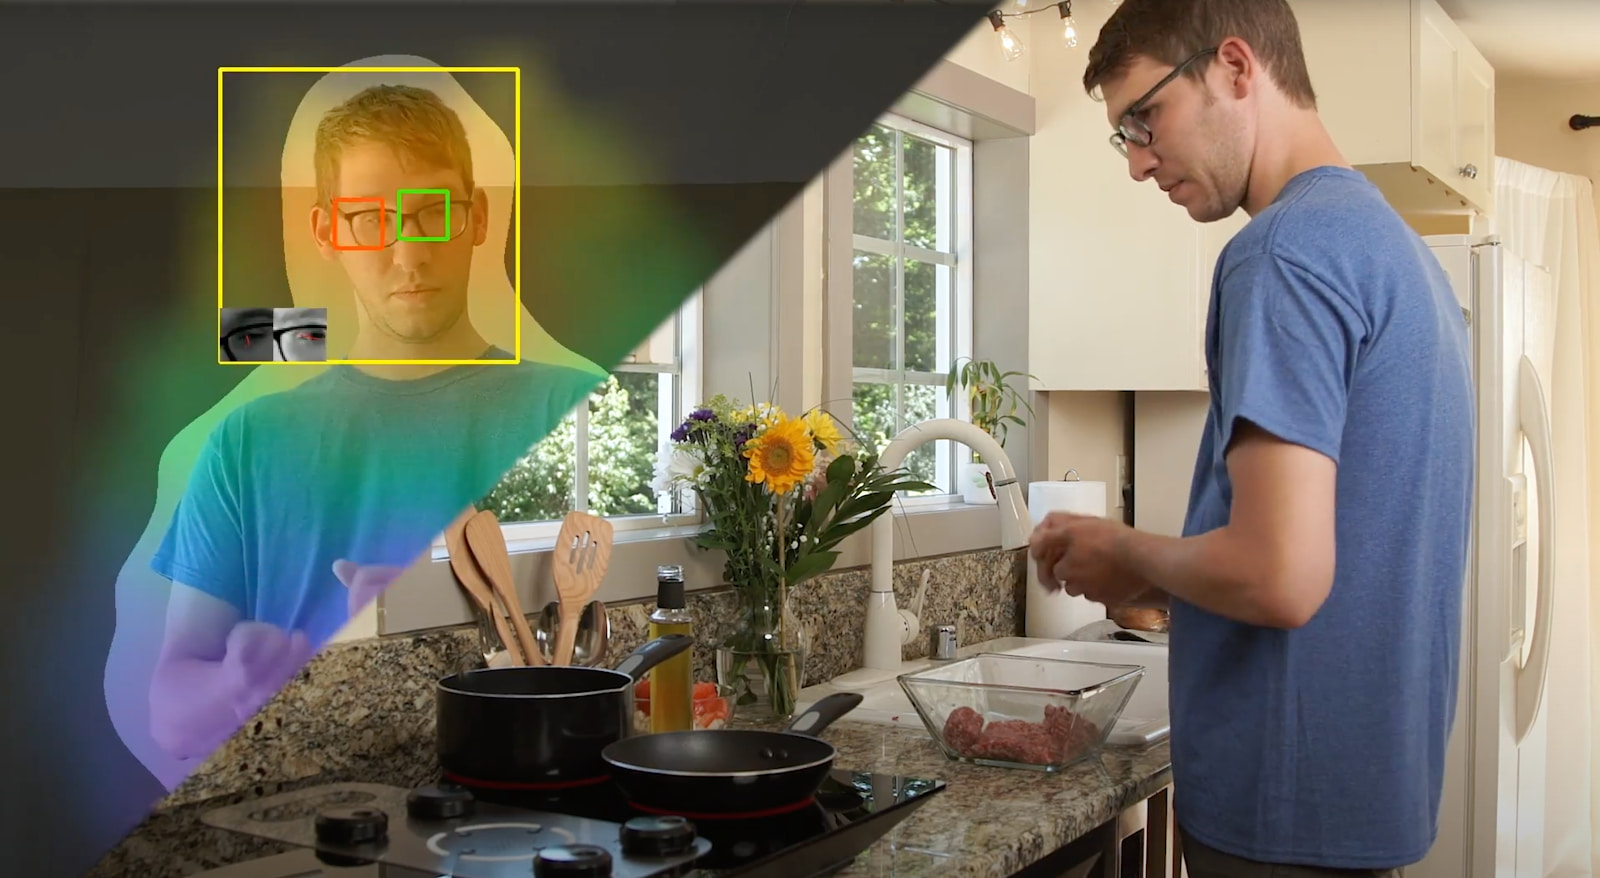 Right side of image shows a person cooking on the Hobgoblin cooktop; left shows the Hobgoblin gaze tracking system finding the person’s eyes and using the neural network-based computer vision algorithms to determine gaze direction and triangulate which burner is being looked at.